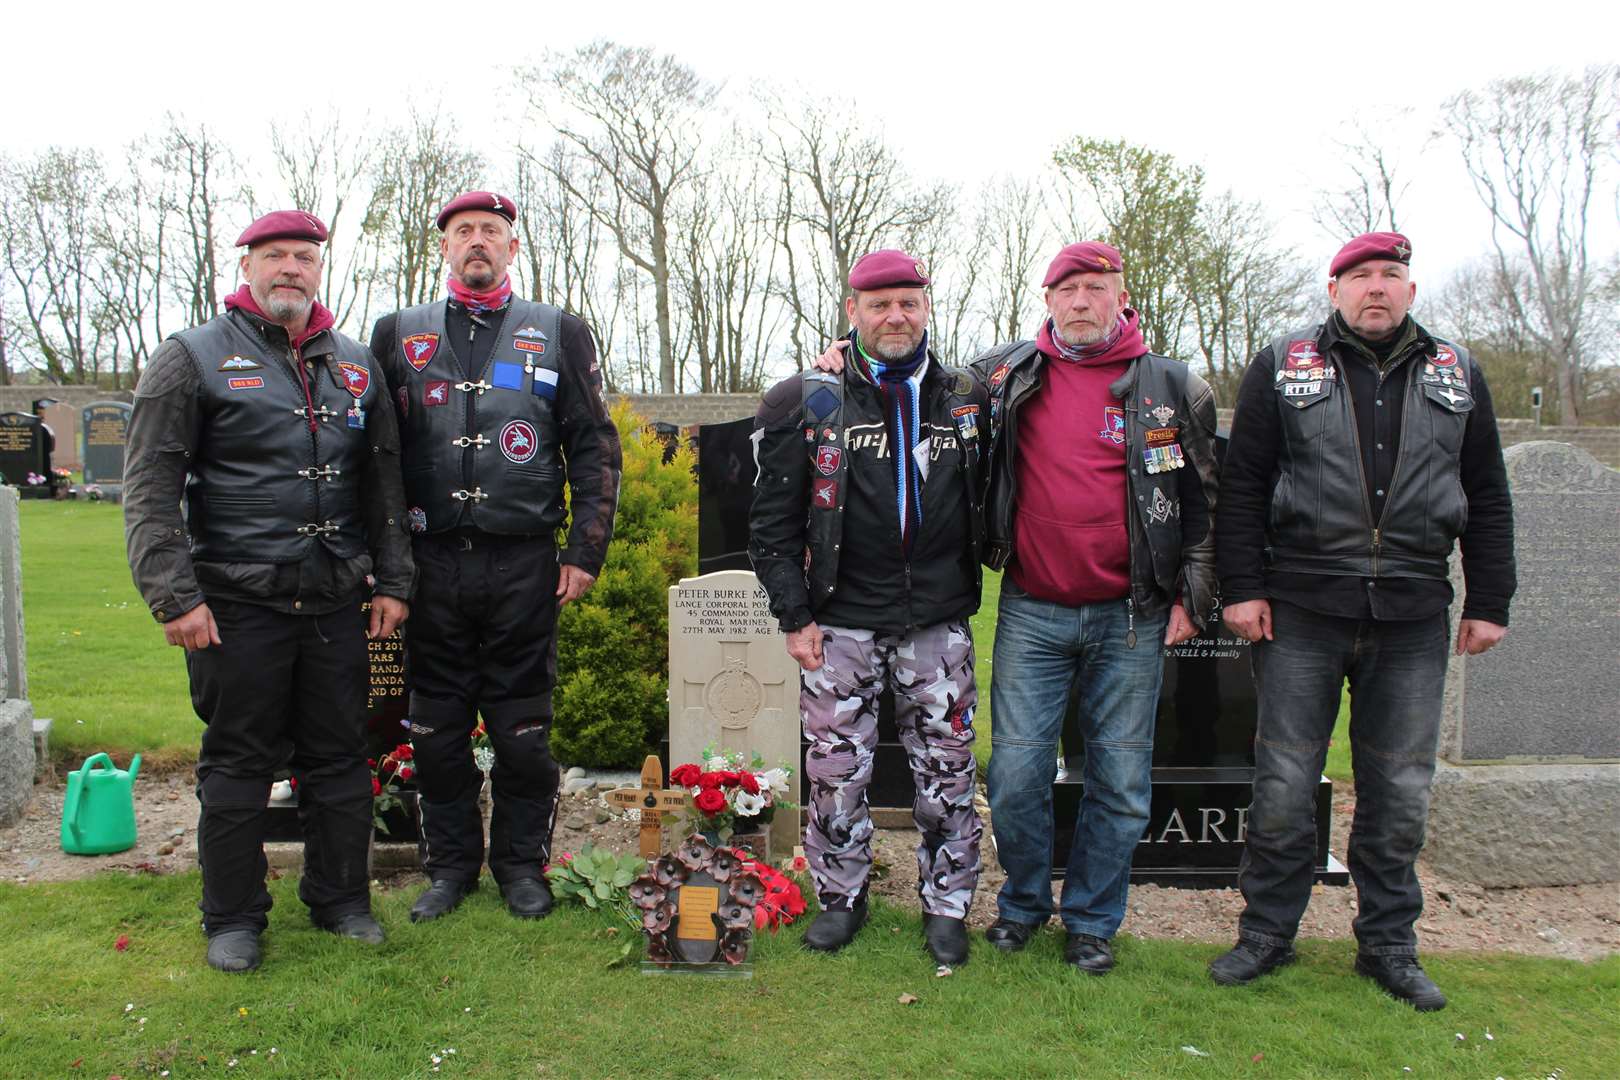 The group of forces motorcyclists (from left) are: Rick Clayton, Des Huby, Charlie McColgan, Paul Moore and Tony McKie.